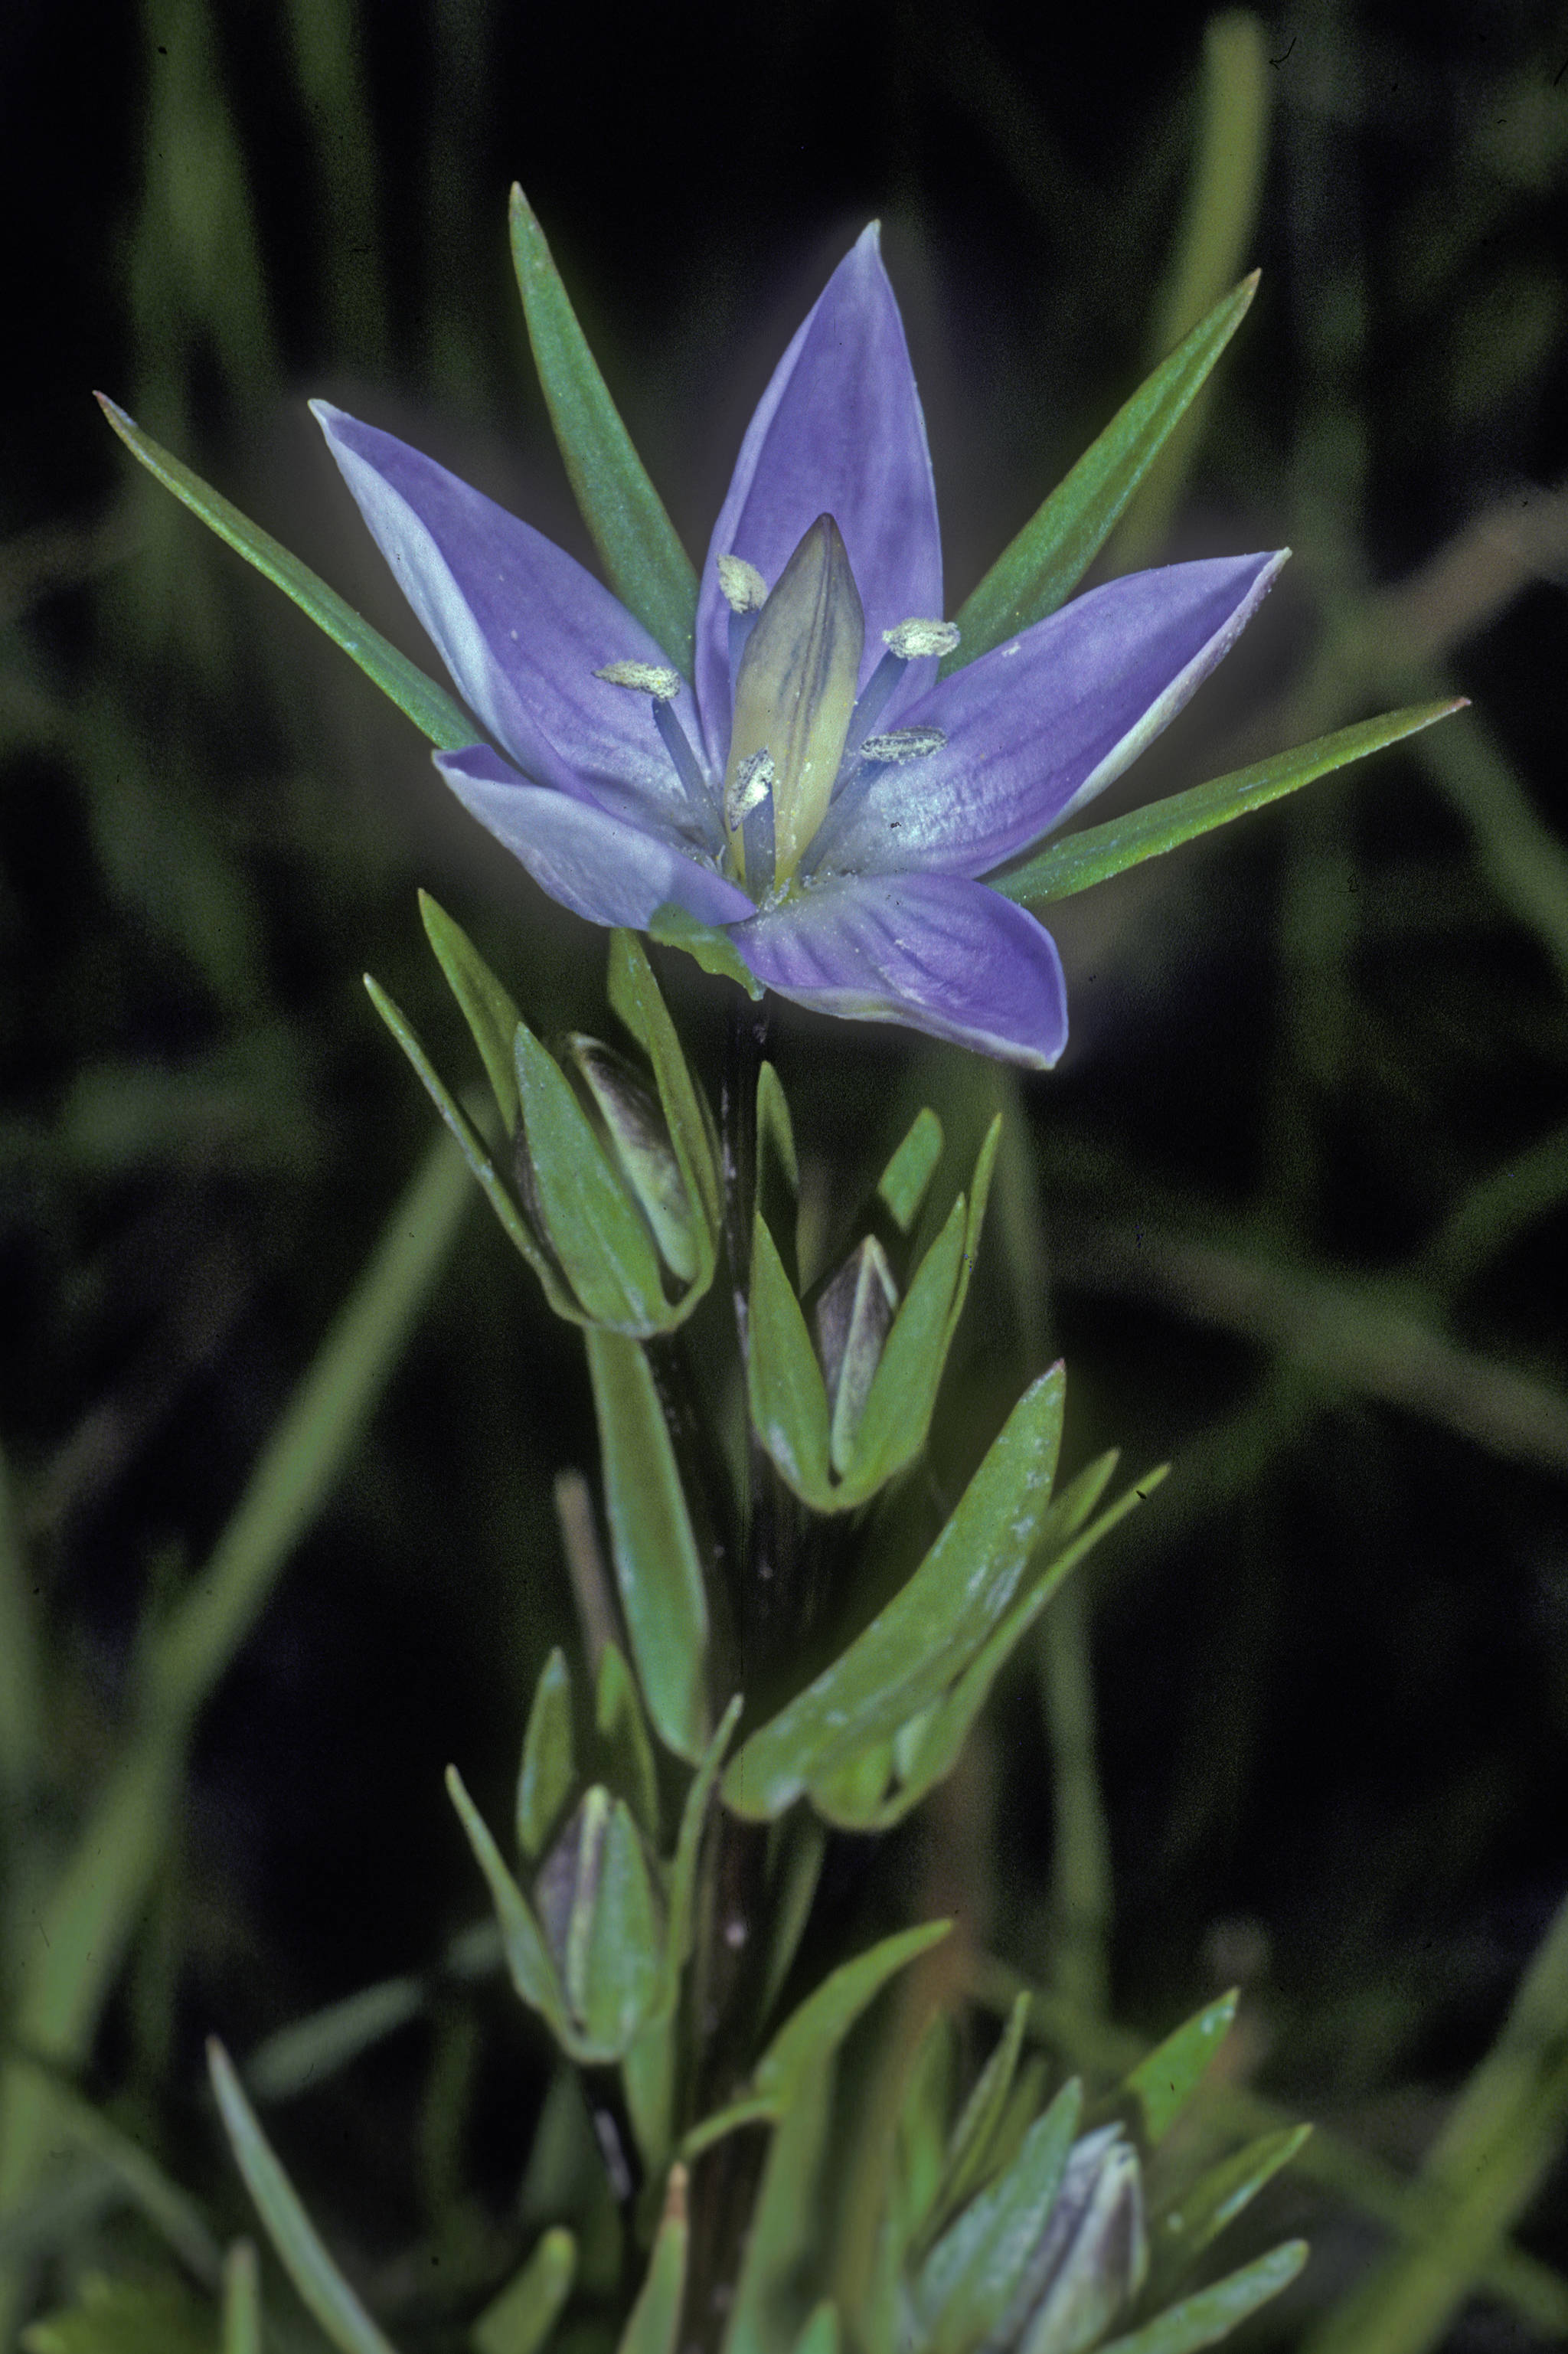 Marsh felwort, a member of the gentian family, shows its starry blue flowers in late summer. (Courtesy Photo | Bob Armstrong)